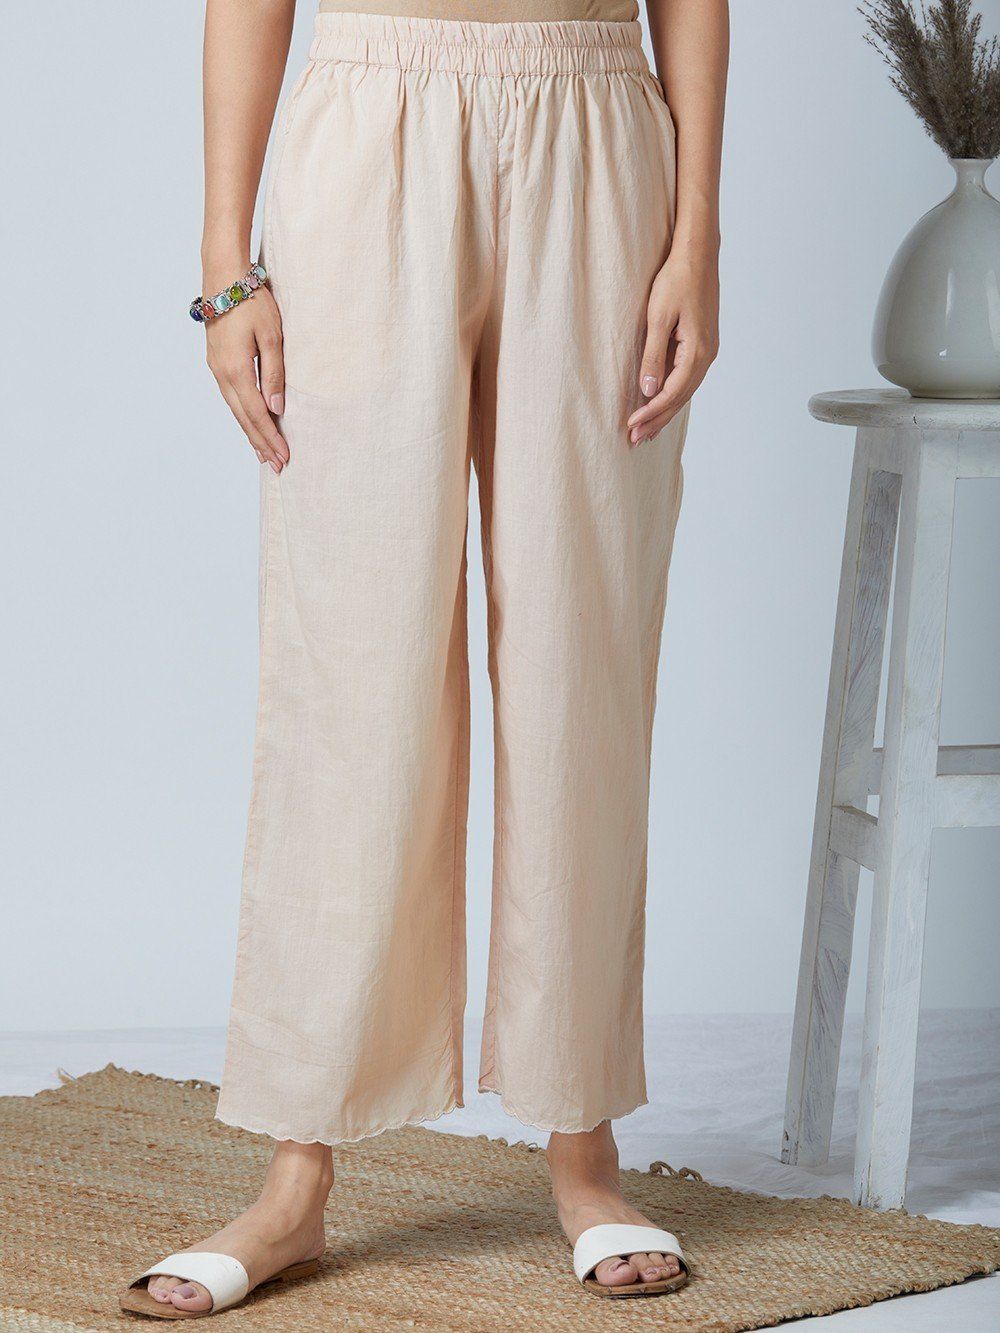 Chloe SEE BY Single-pleated Cotton Palazzo Pants women - Glamood Outlet-hkpdtq2012.edu.vn